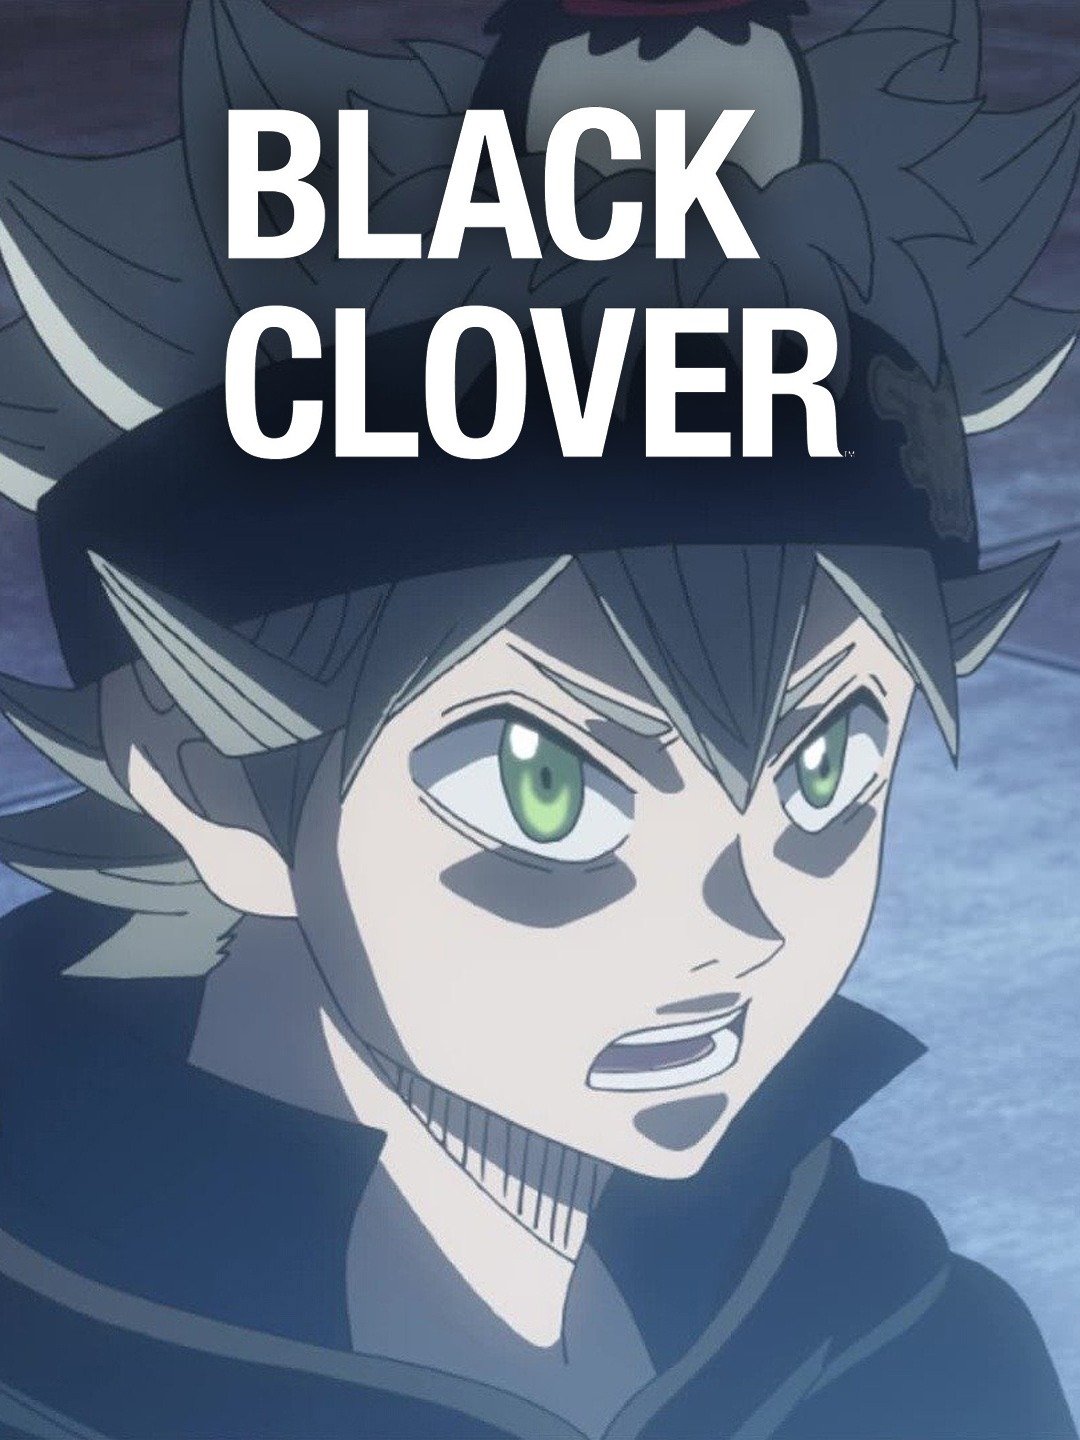 Is the Black Clover Anime Finished? Is It Coming Back?